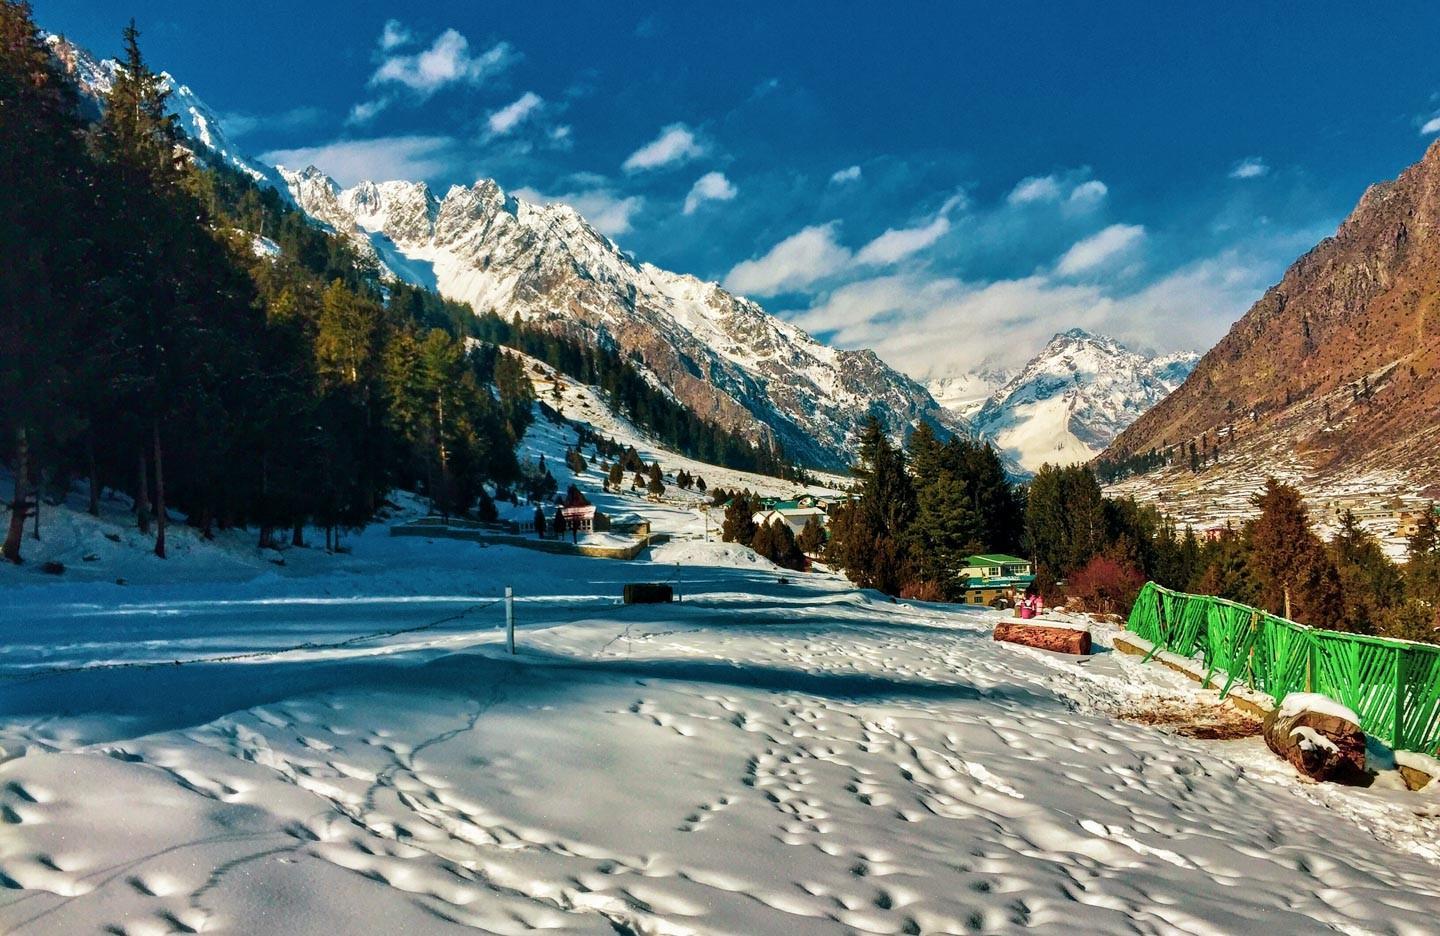 Naltar Valley has the best ski resort in the country